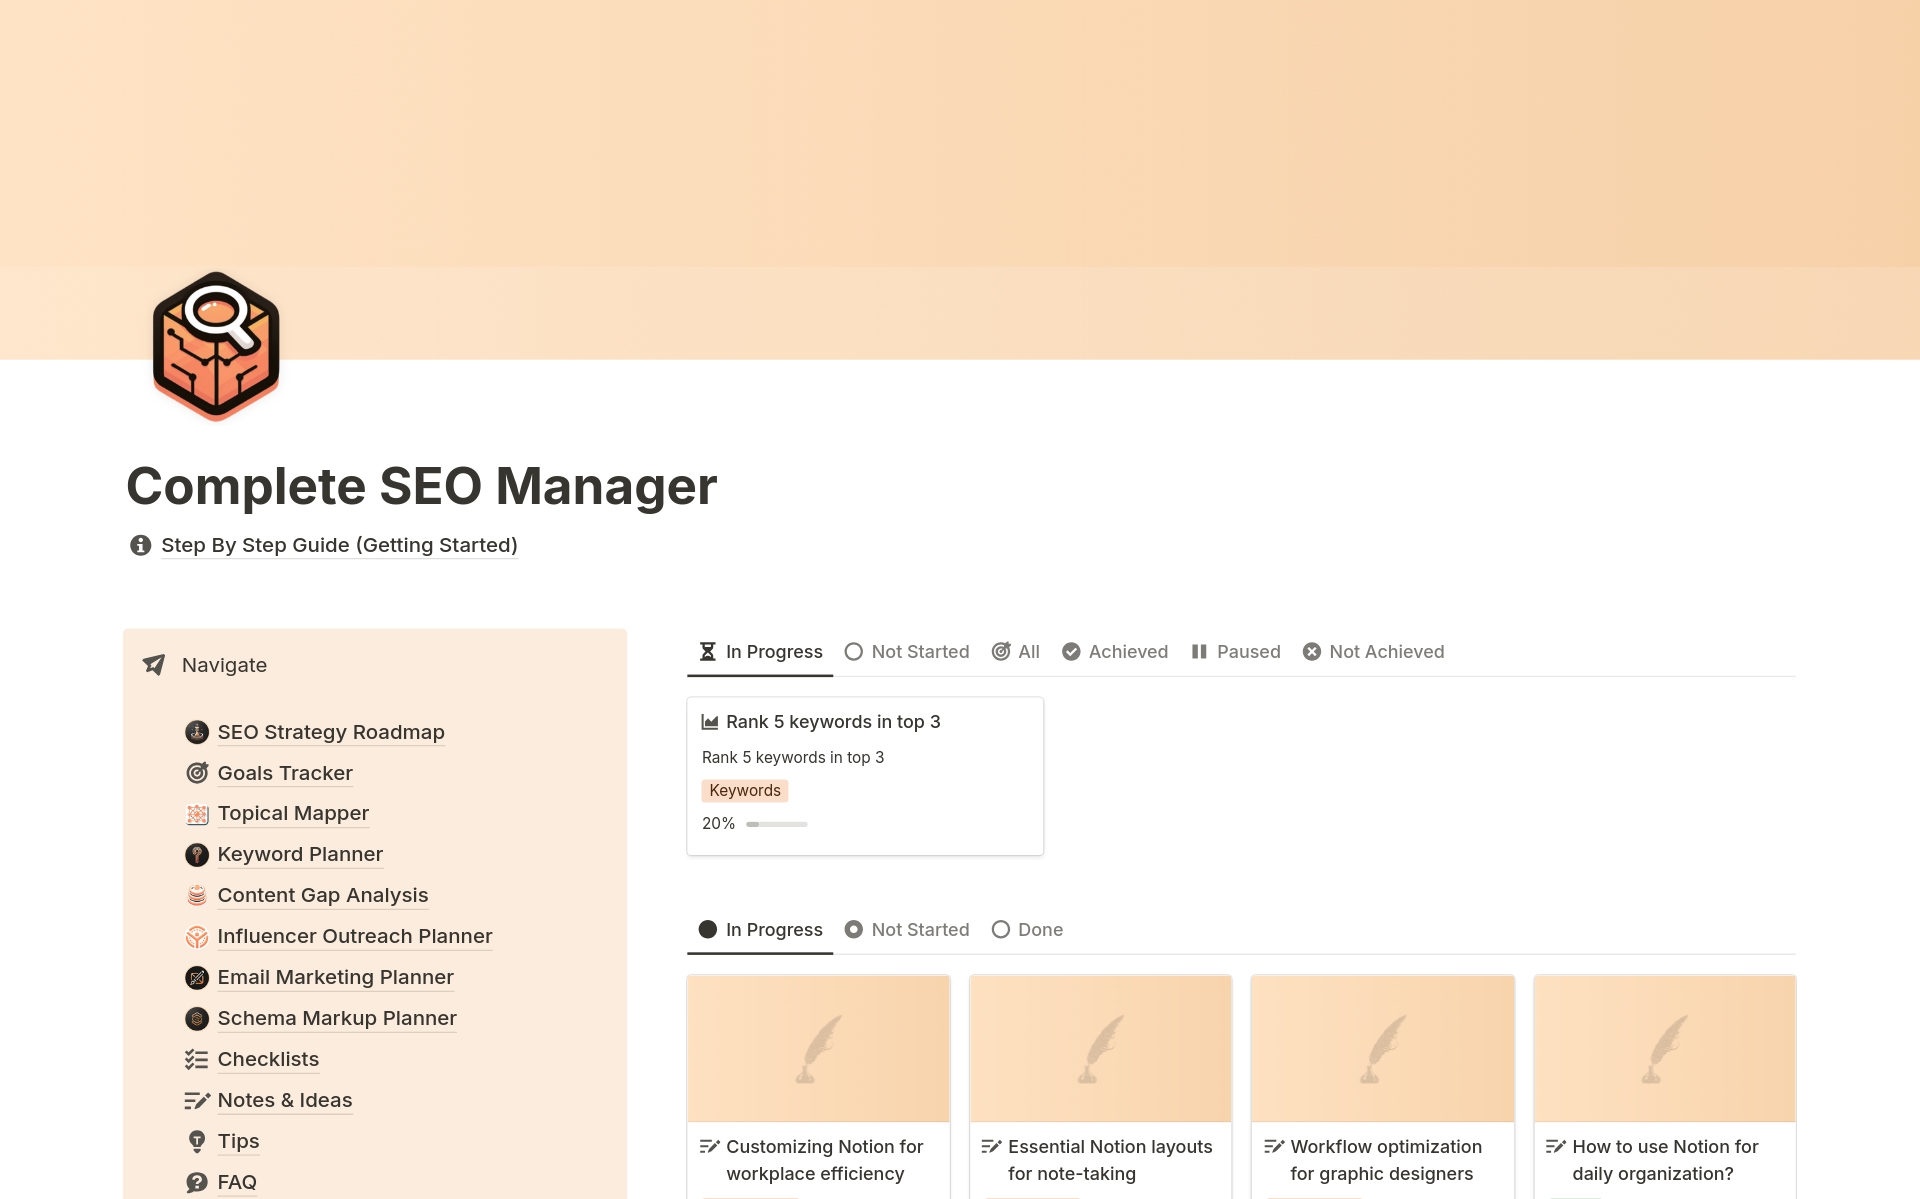 Complete SEO Manager: A holistic Notion template designed for SEO professionals and enthusiasts.

Scale Your Website With SEO Using Notion.

You can use this all-in-one system to manage your entire SEO strategy.

It gives you all the systems and tools you need.